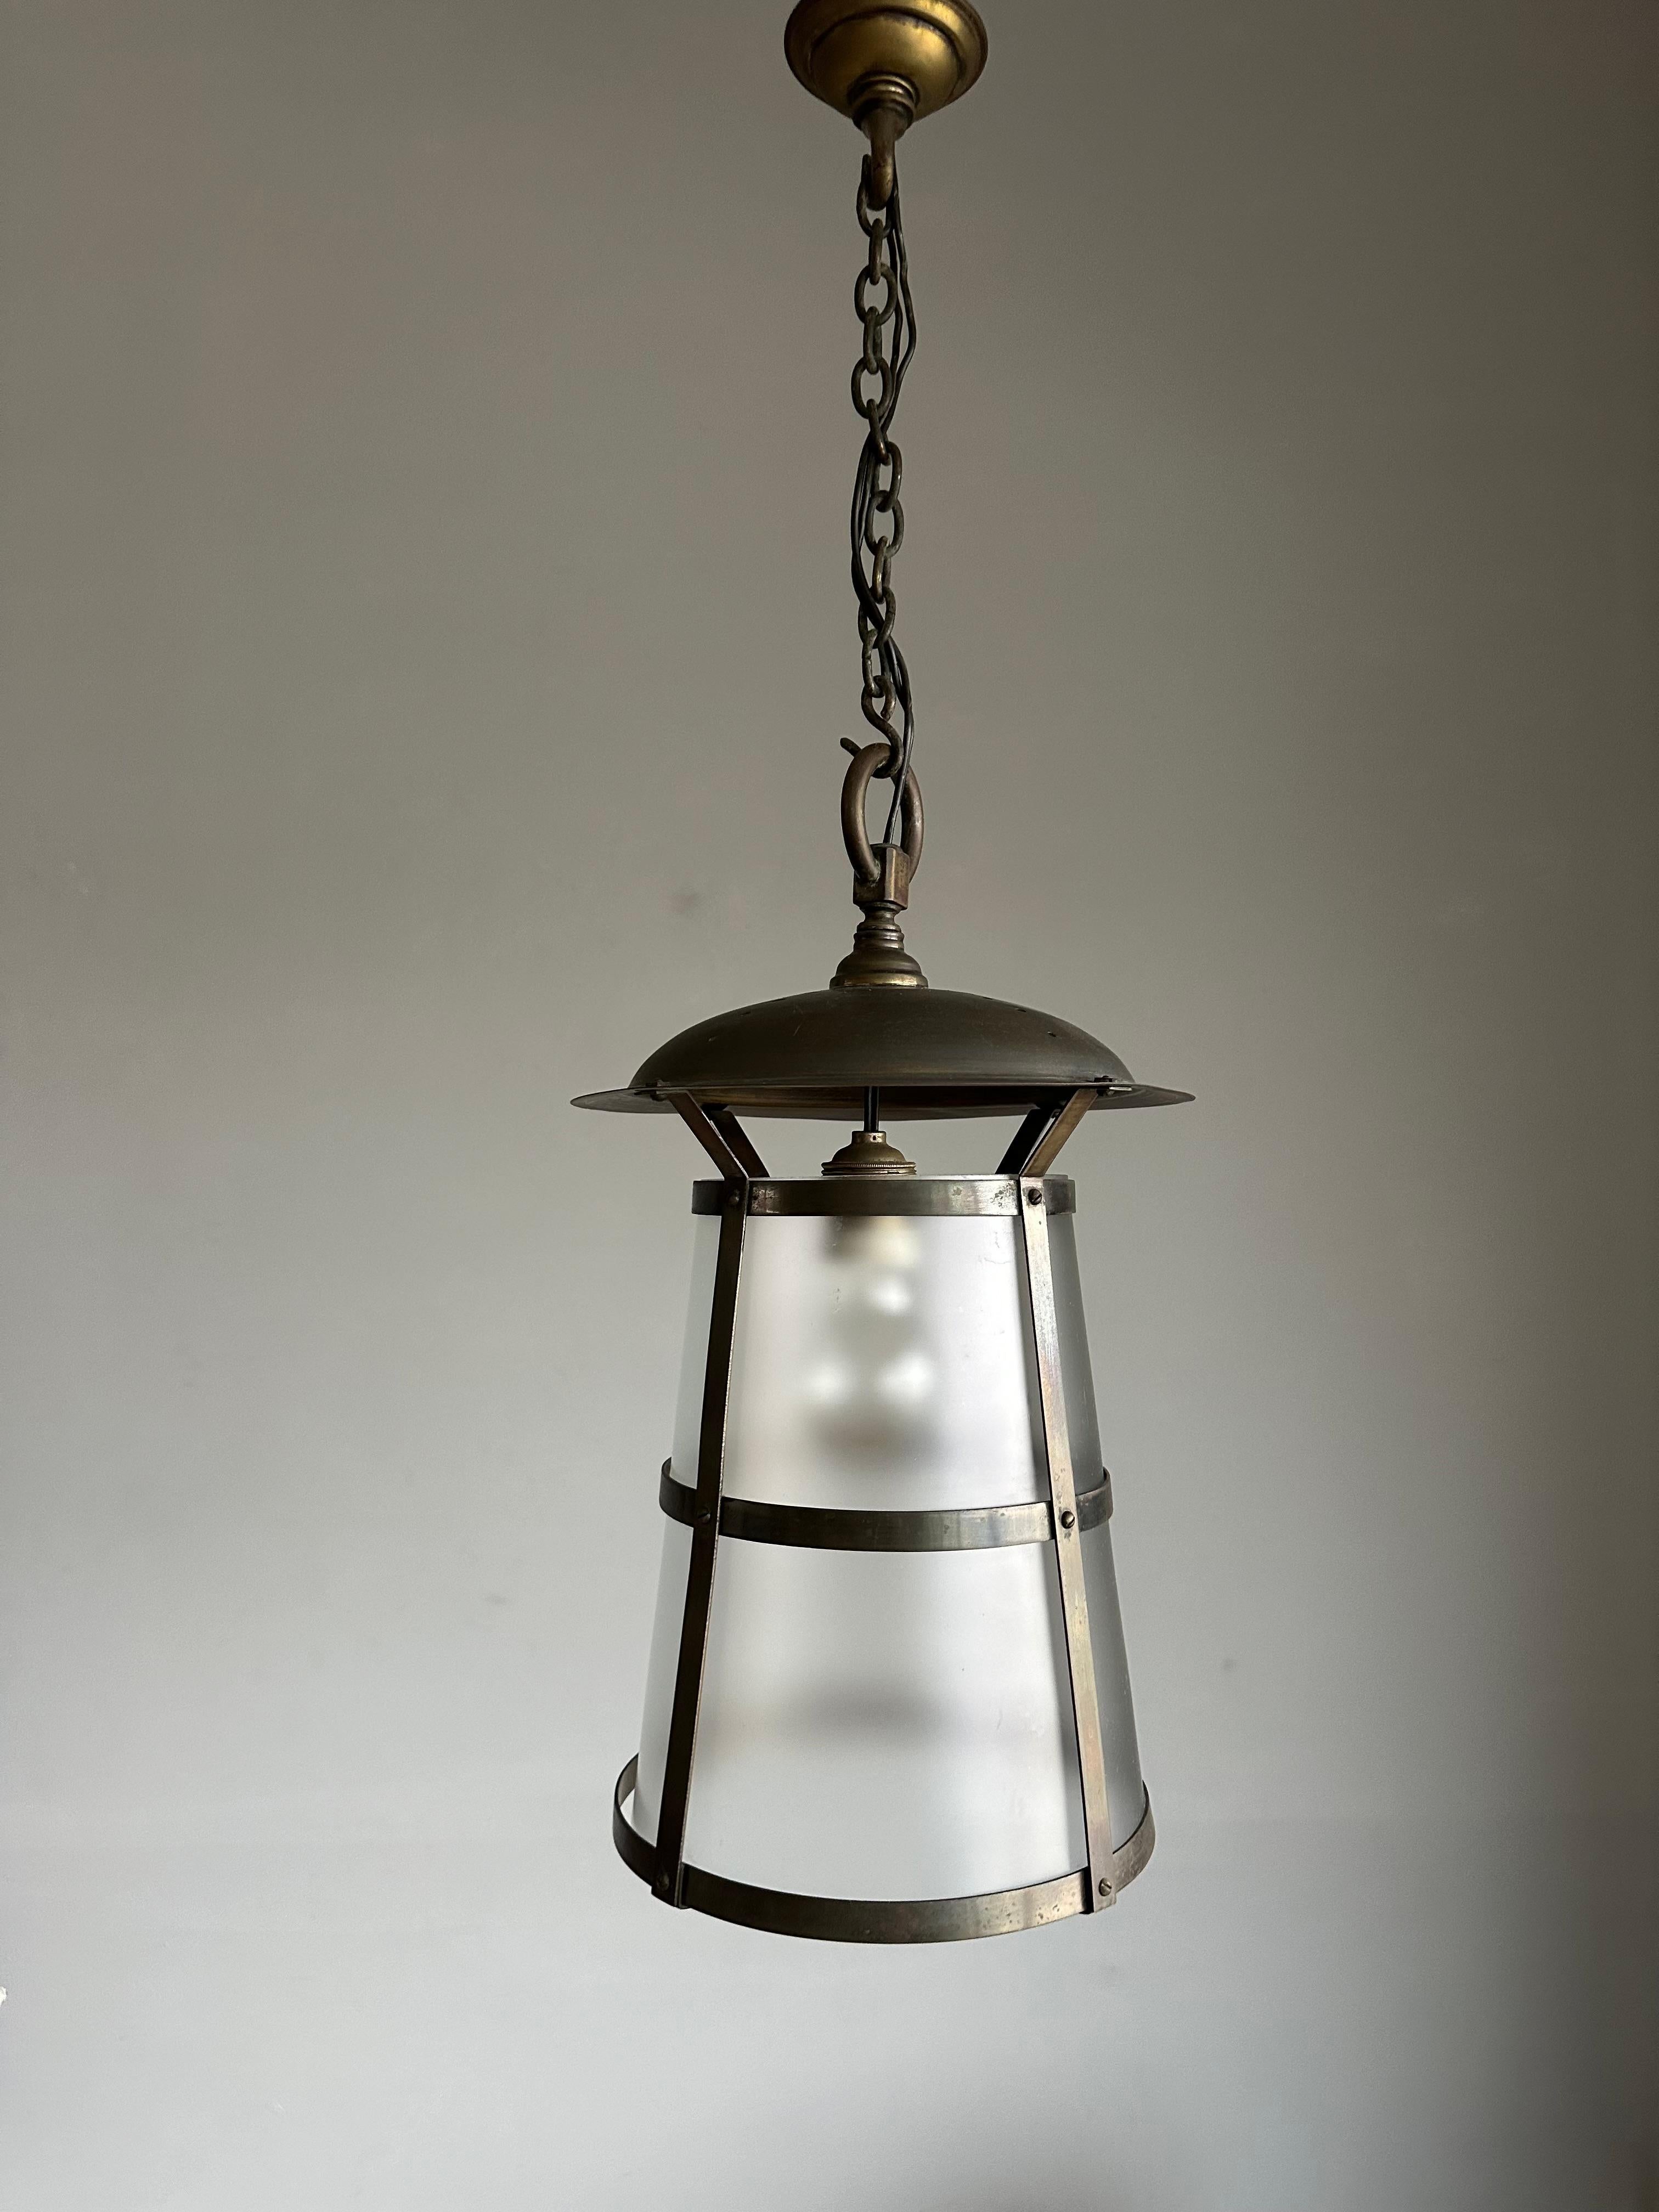 Highly Stylish Brass and Glass Arts & Crafts Pendant Light, 1910 Berlage Style For Sale 1